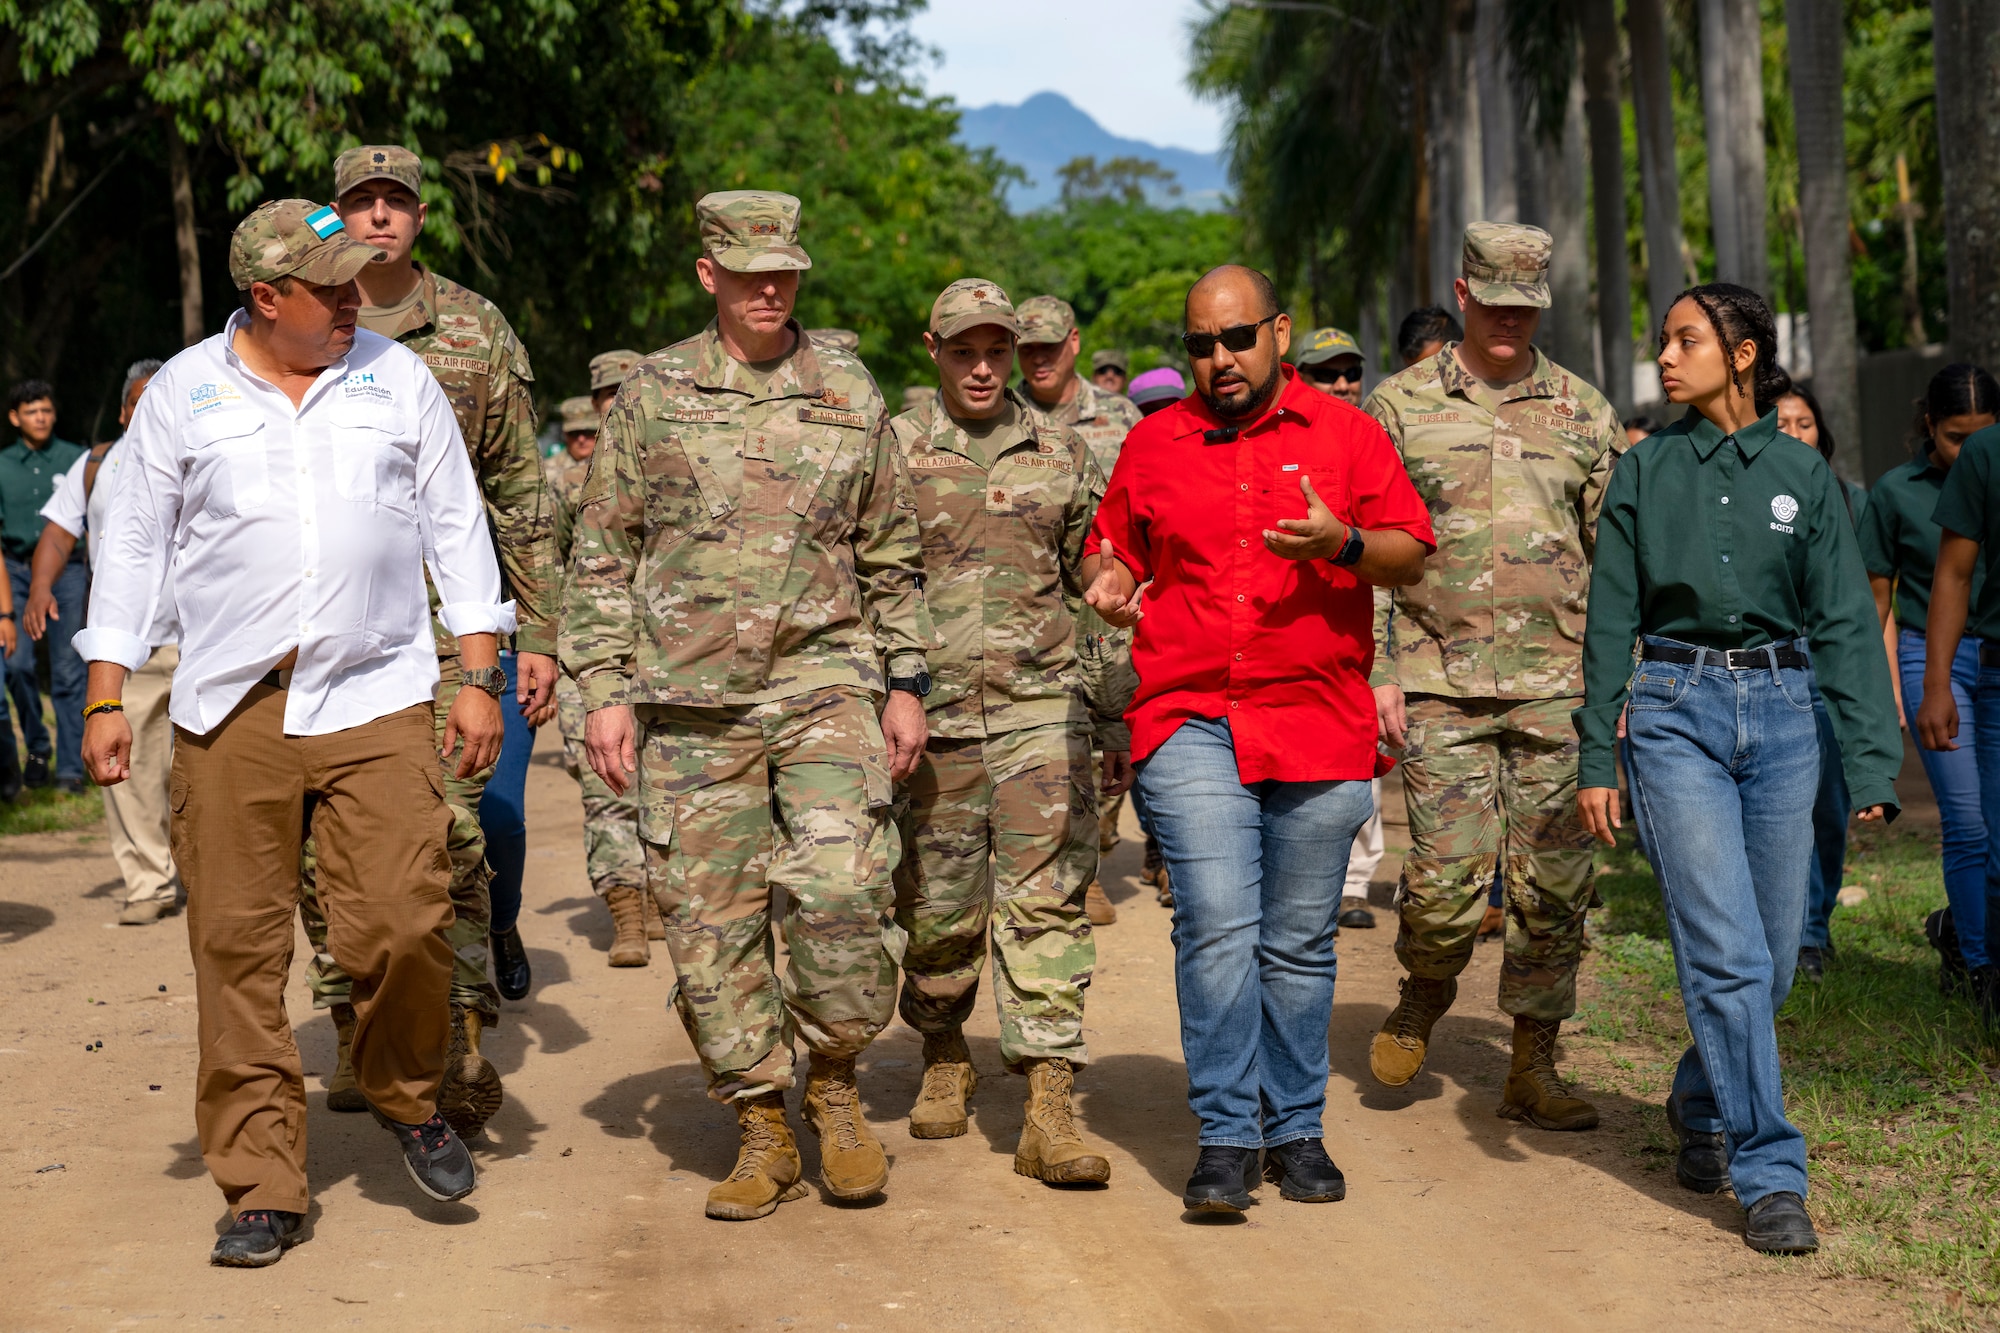 Honduras Minister of Education, Professor Daniel Esponda, center-right, leads U.S. Maj. Gen. Evan Pettus, 12th Air Force (Air Forces Southern) commander, center left, on a tour of the campus grounds for the System of Technological and Agricultural Innovation (SCITA) in Comayagua, Honduras, Aug. 4, 2023. U.S. Southern Command's Humanitarian Assistance Program donated $25,000 to SCITA for improvements to infrastructure that are key to ensuring quality education for Hondurans. (U.S. Air Force photo by Tech. Sgt. Rachel Maxwell)